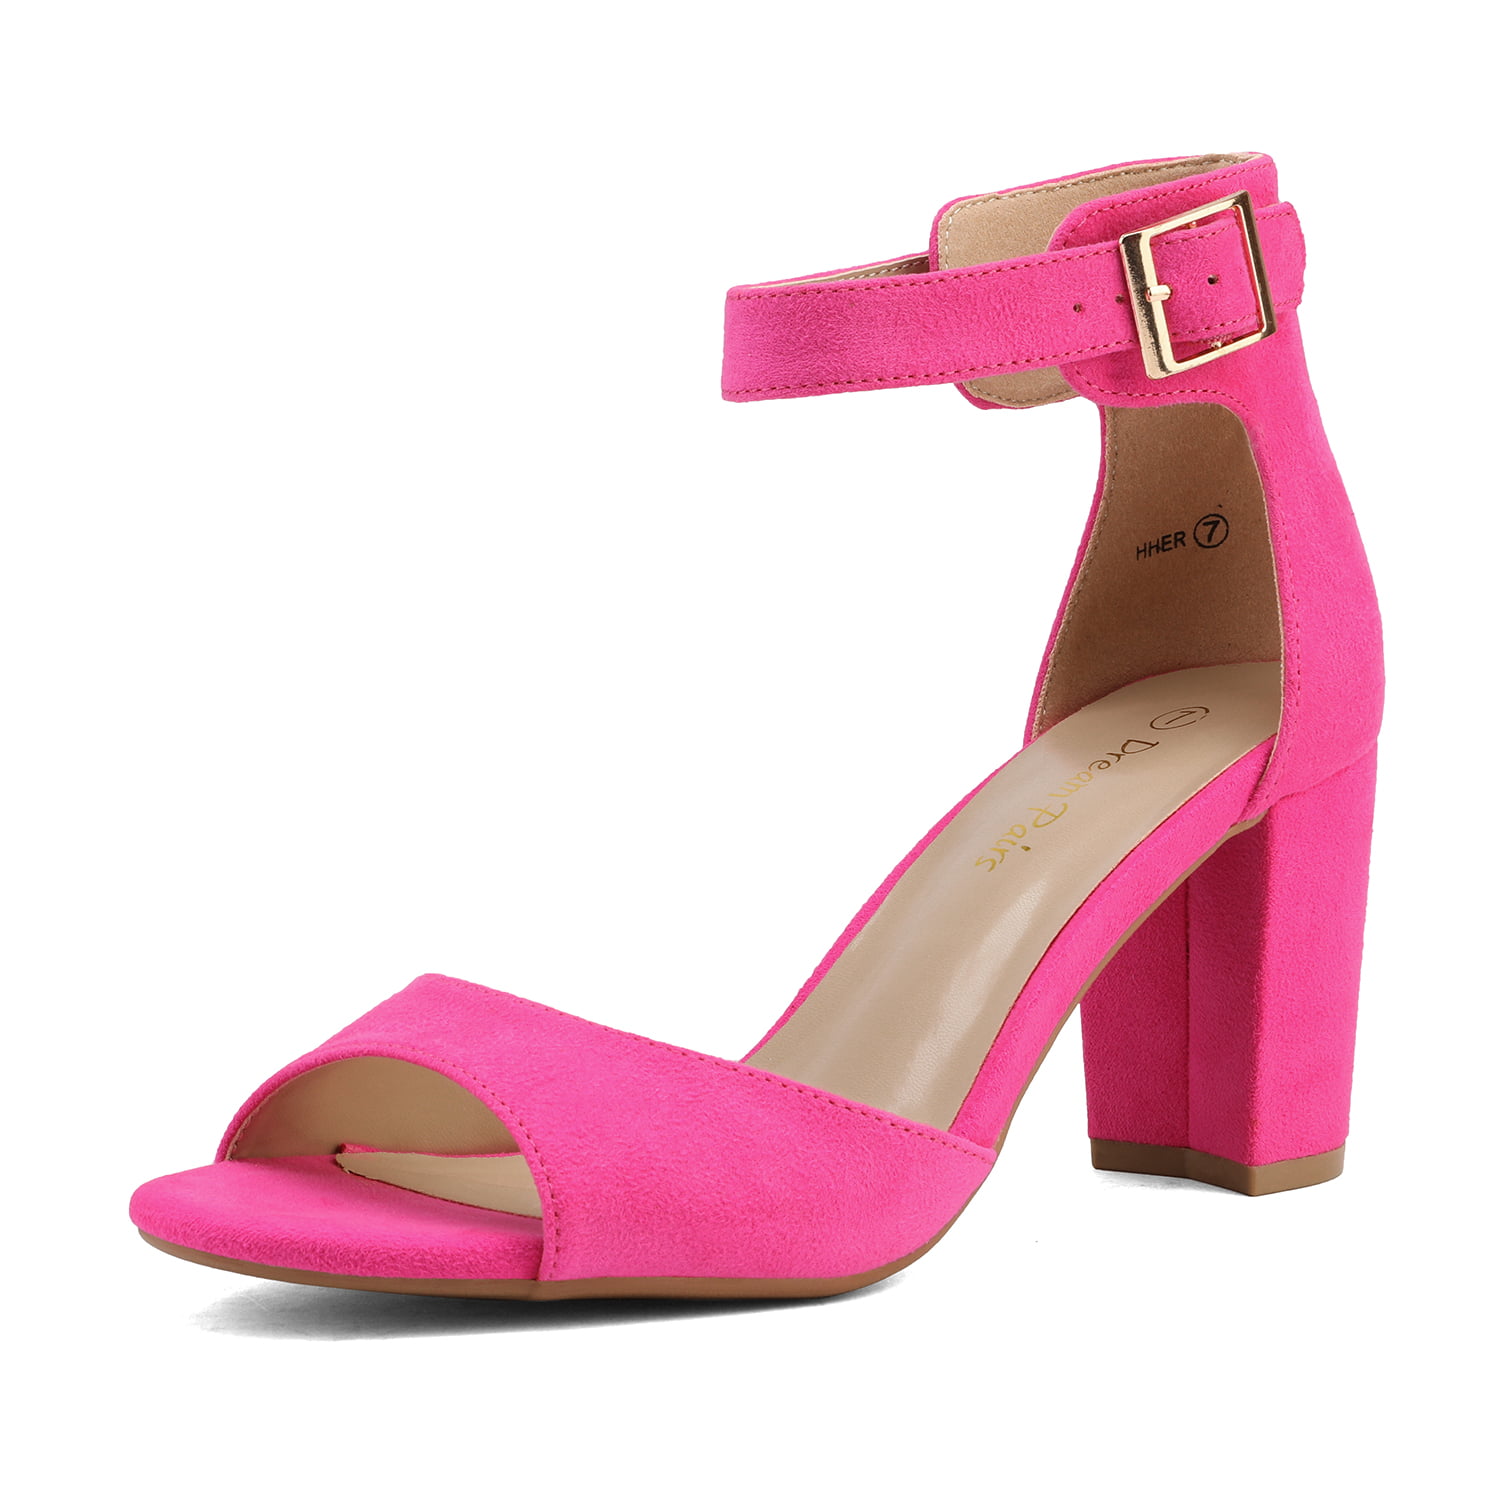 DREAM PAIRS Women Fashion Ankle Open Toe Sandals Chunky Heel Sandals Dress Shoes HHER FUCHSIA/SUEDE Size - Walmart.com